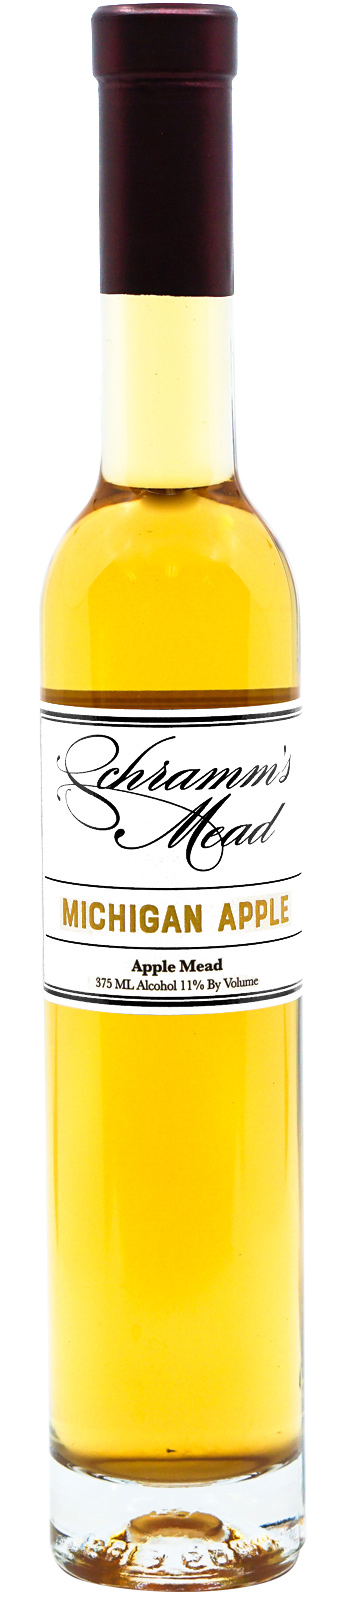 Michigan Apple - Apple Mead - 375 ML Alcohol 11% By Volume